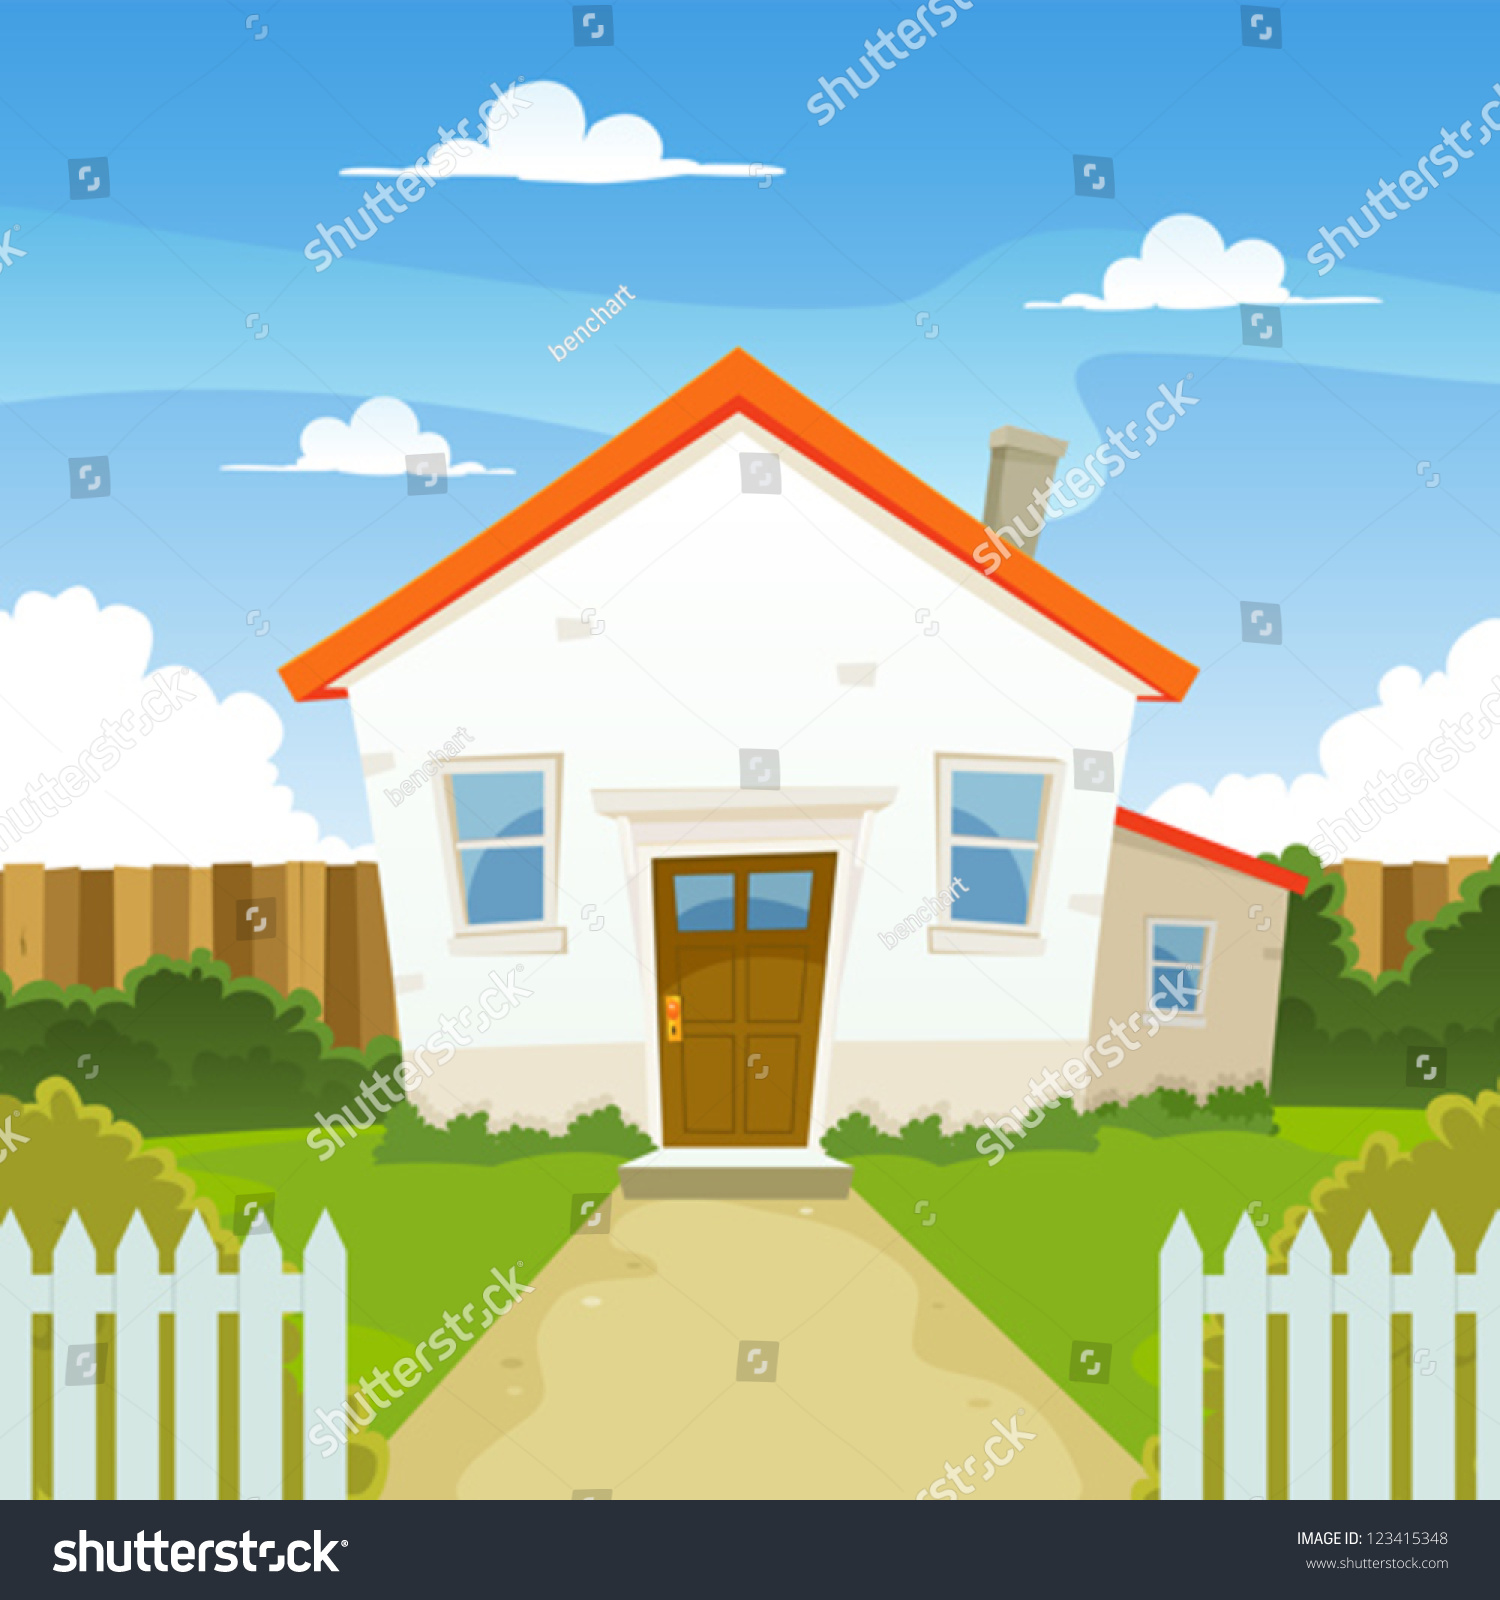 house with garden clipart - photo #26